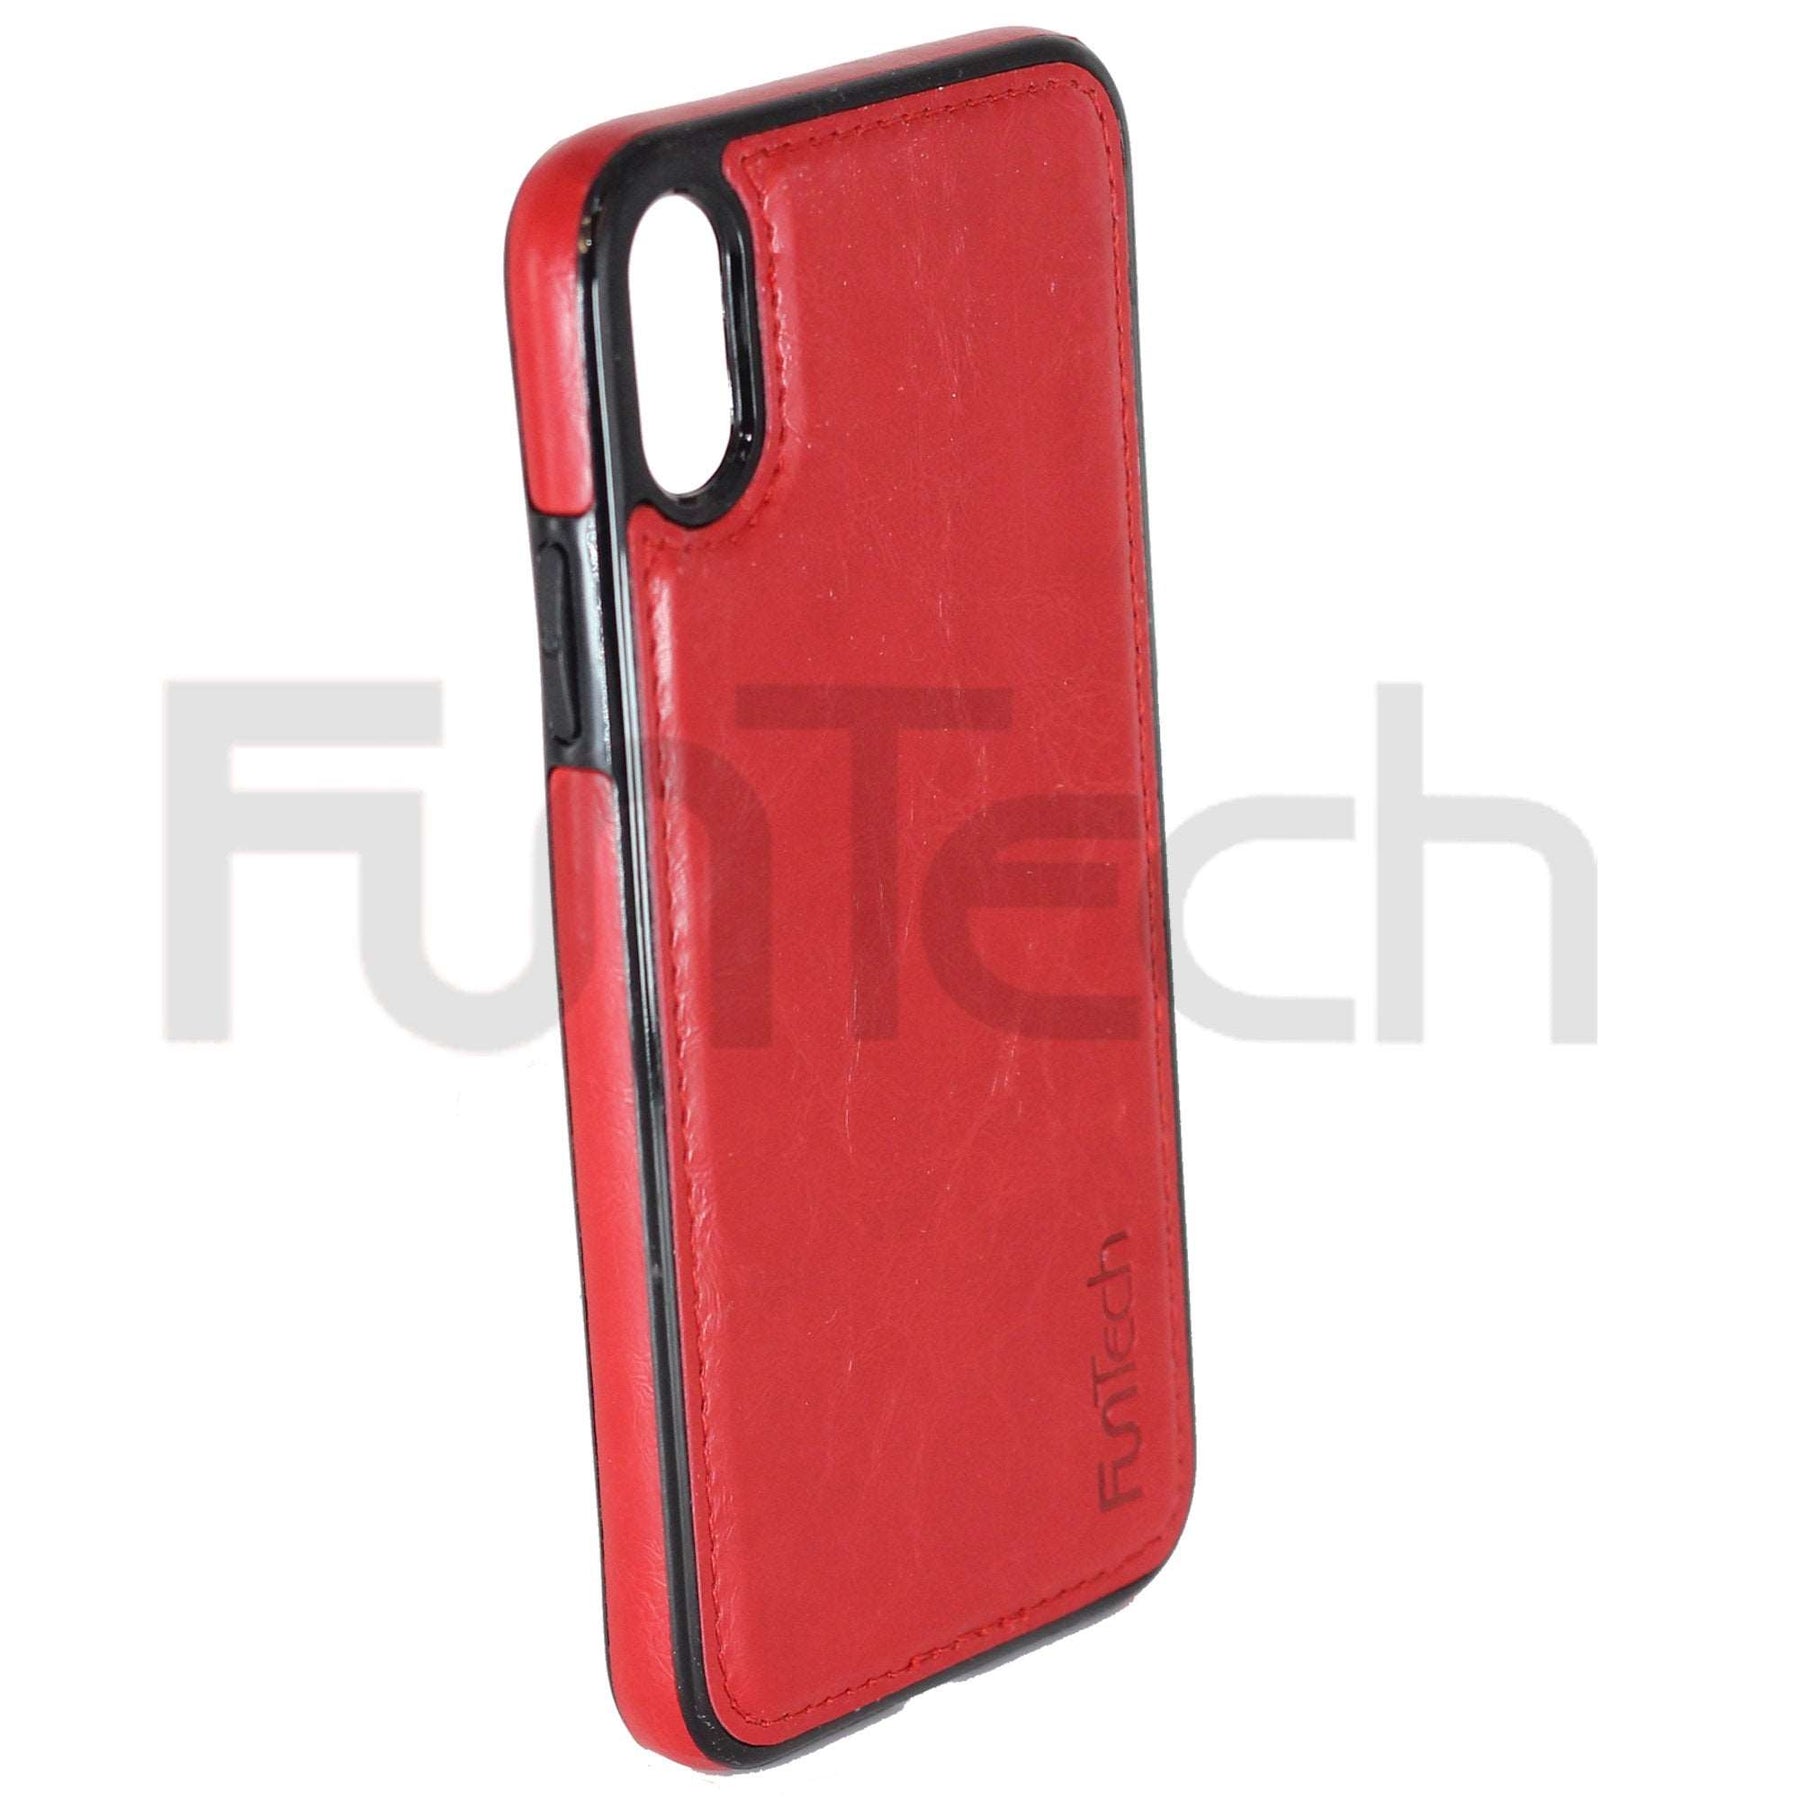 Apple iPhone X Leather Back Cover Case Red